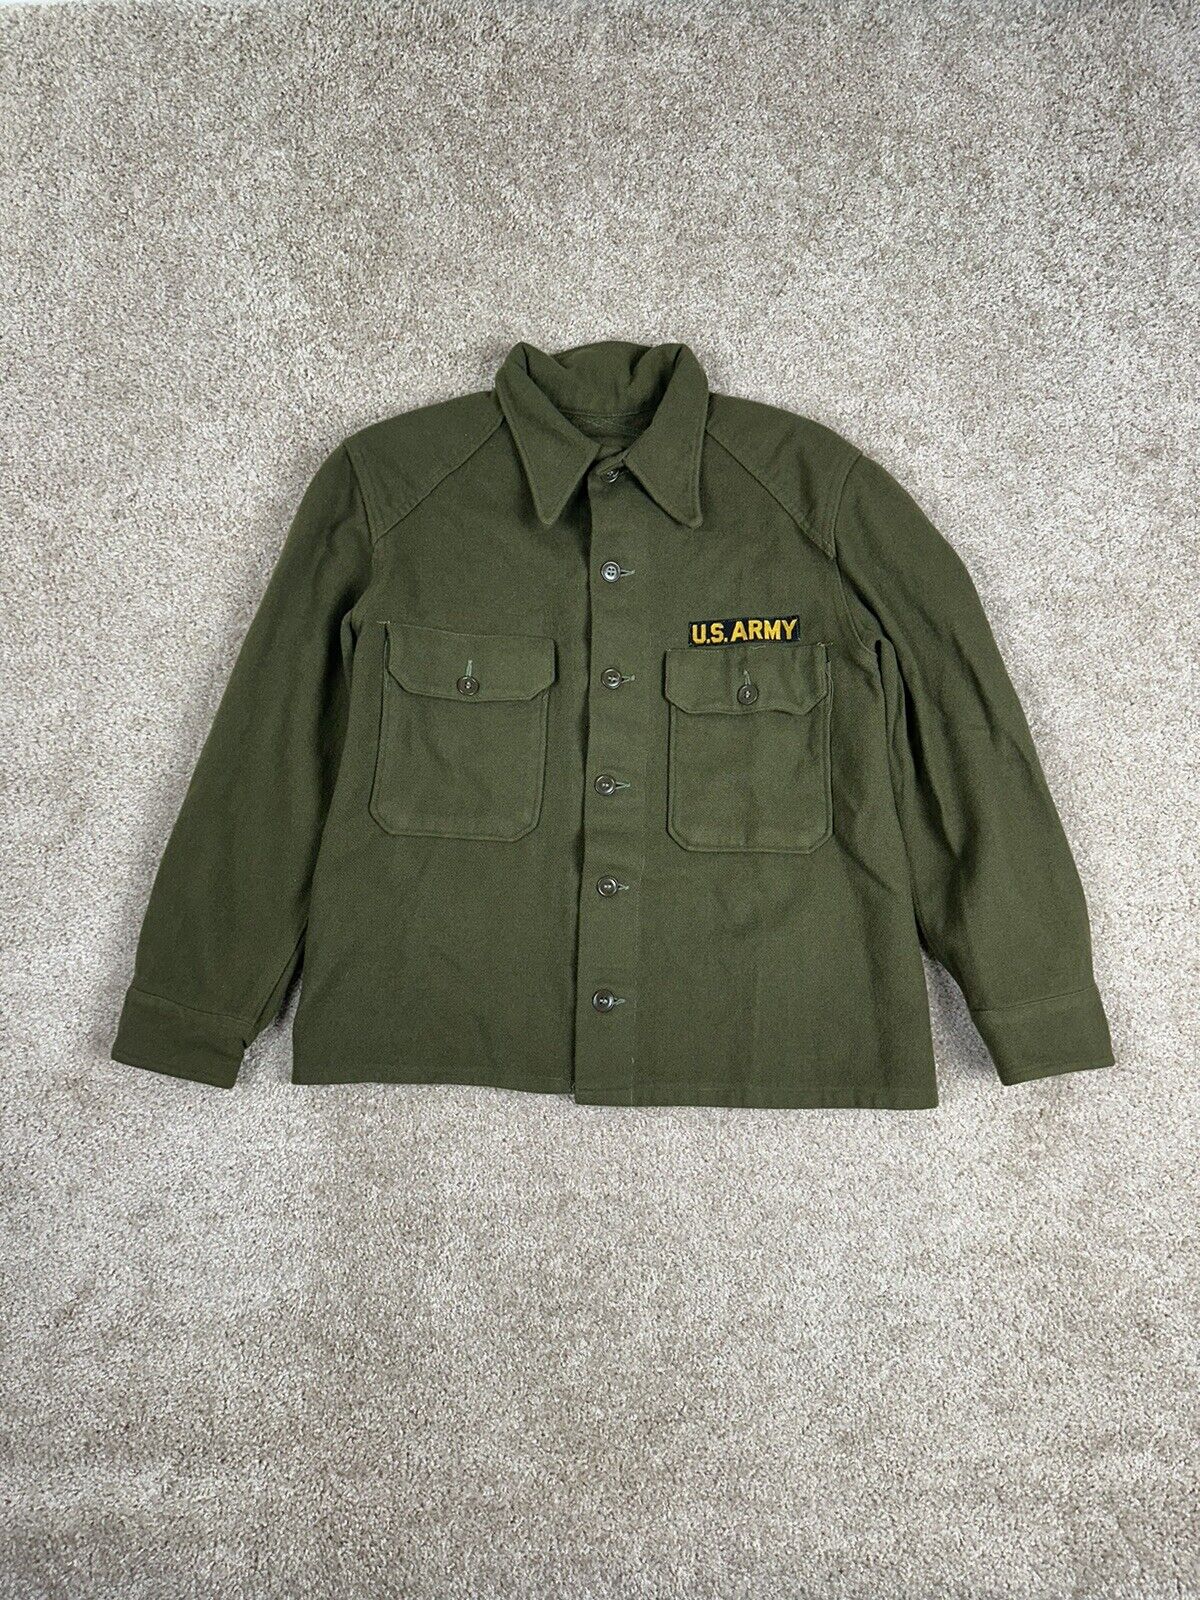 1950’s Korean War Vintage US Army Green Thick Wool OG108 Field Shirt Size Small